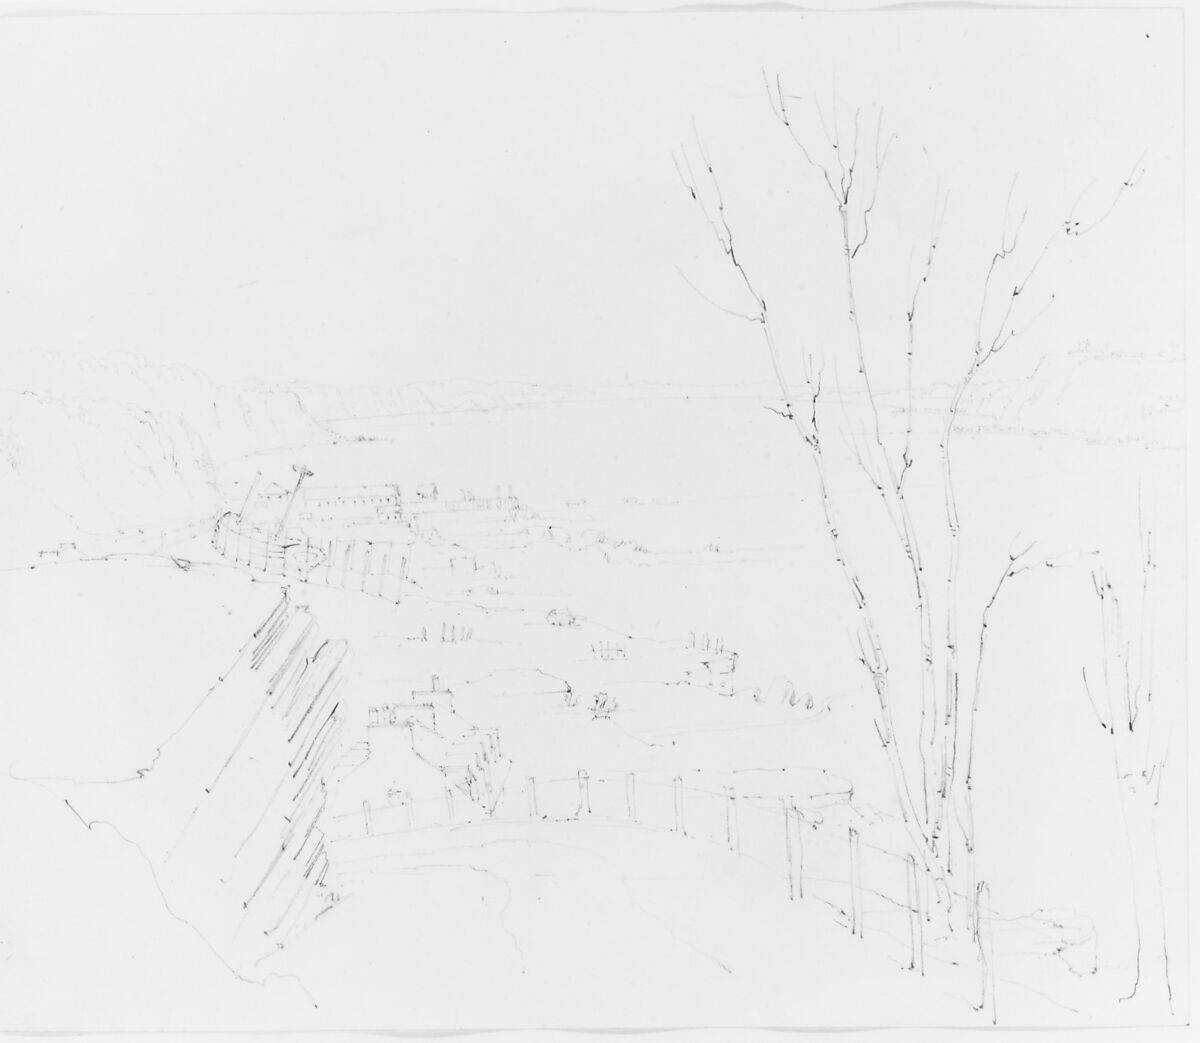 View of Shoreline from Roadway Above (from Sketchbook), John William Casilear (American, New York 1811–1893 Saratoga Springs, New York), Graphite on wove paper, American 